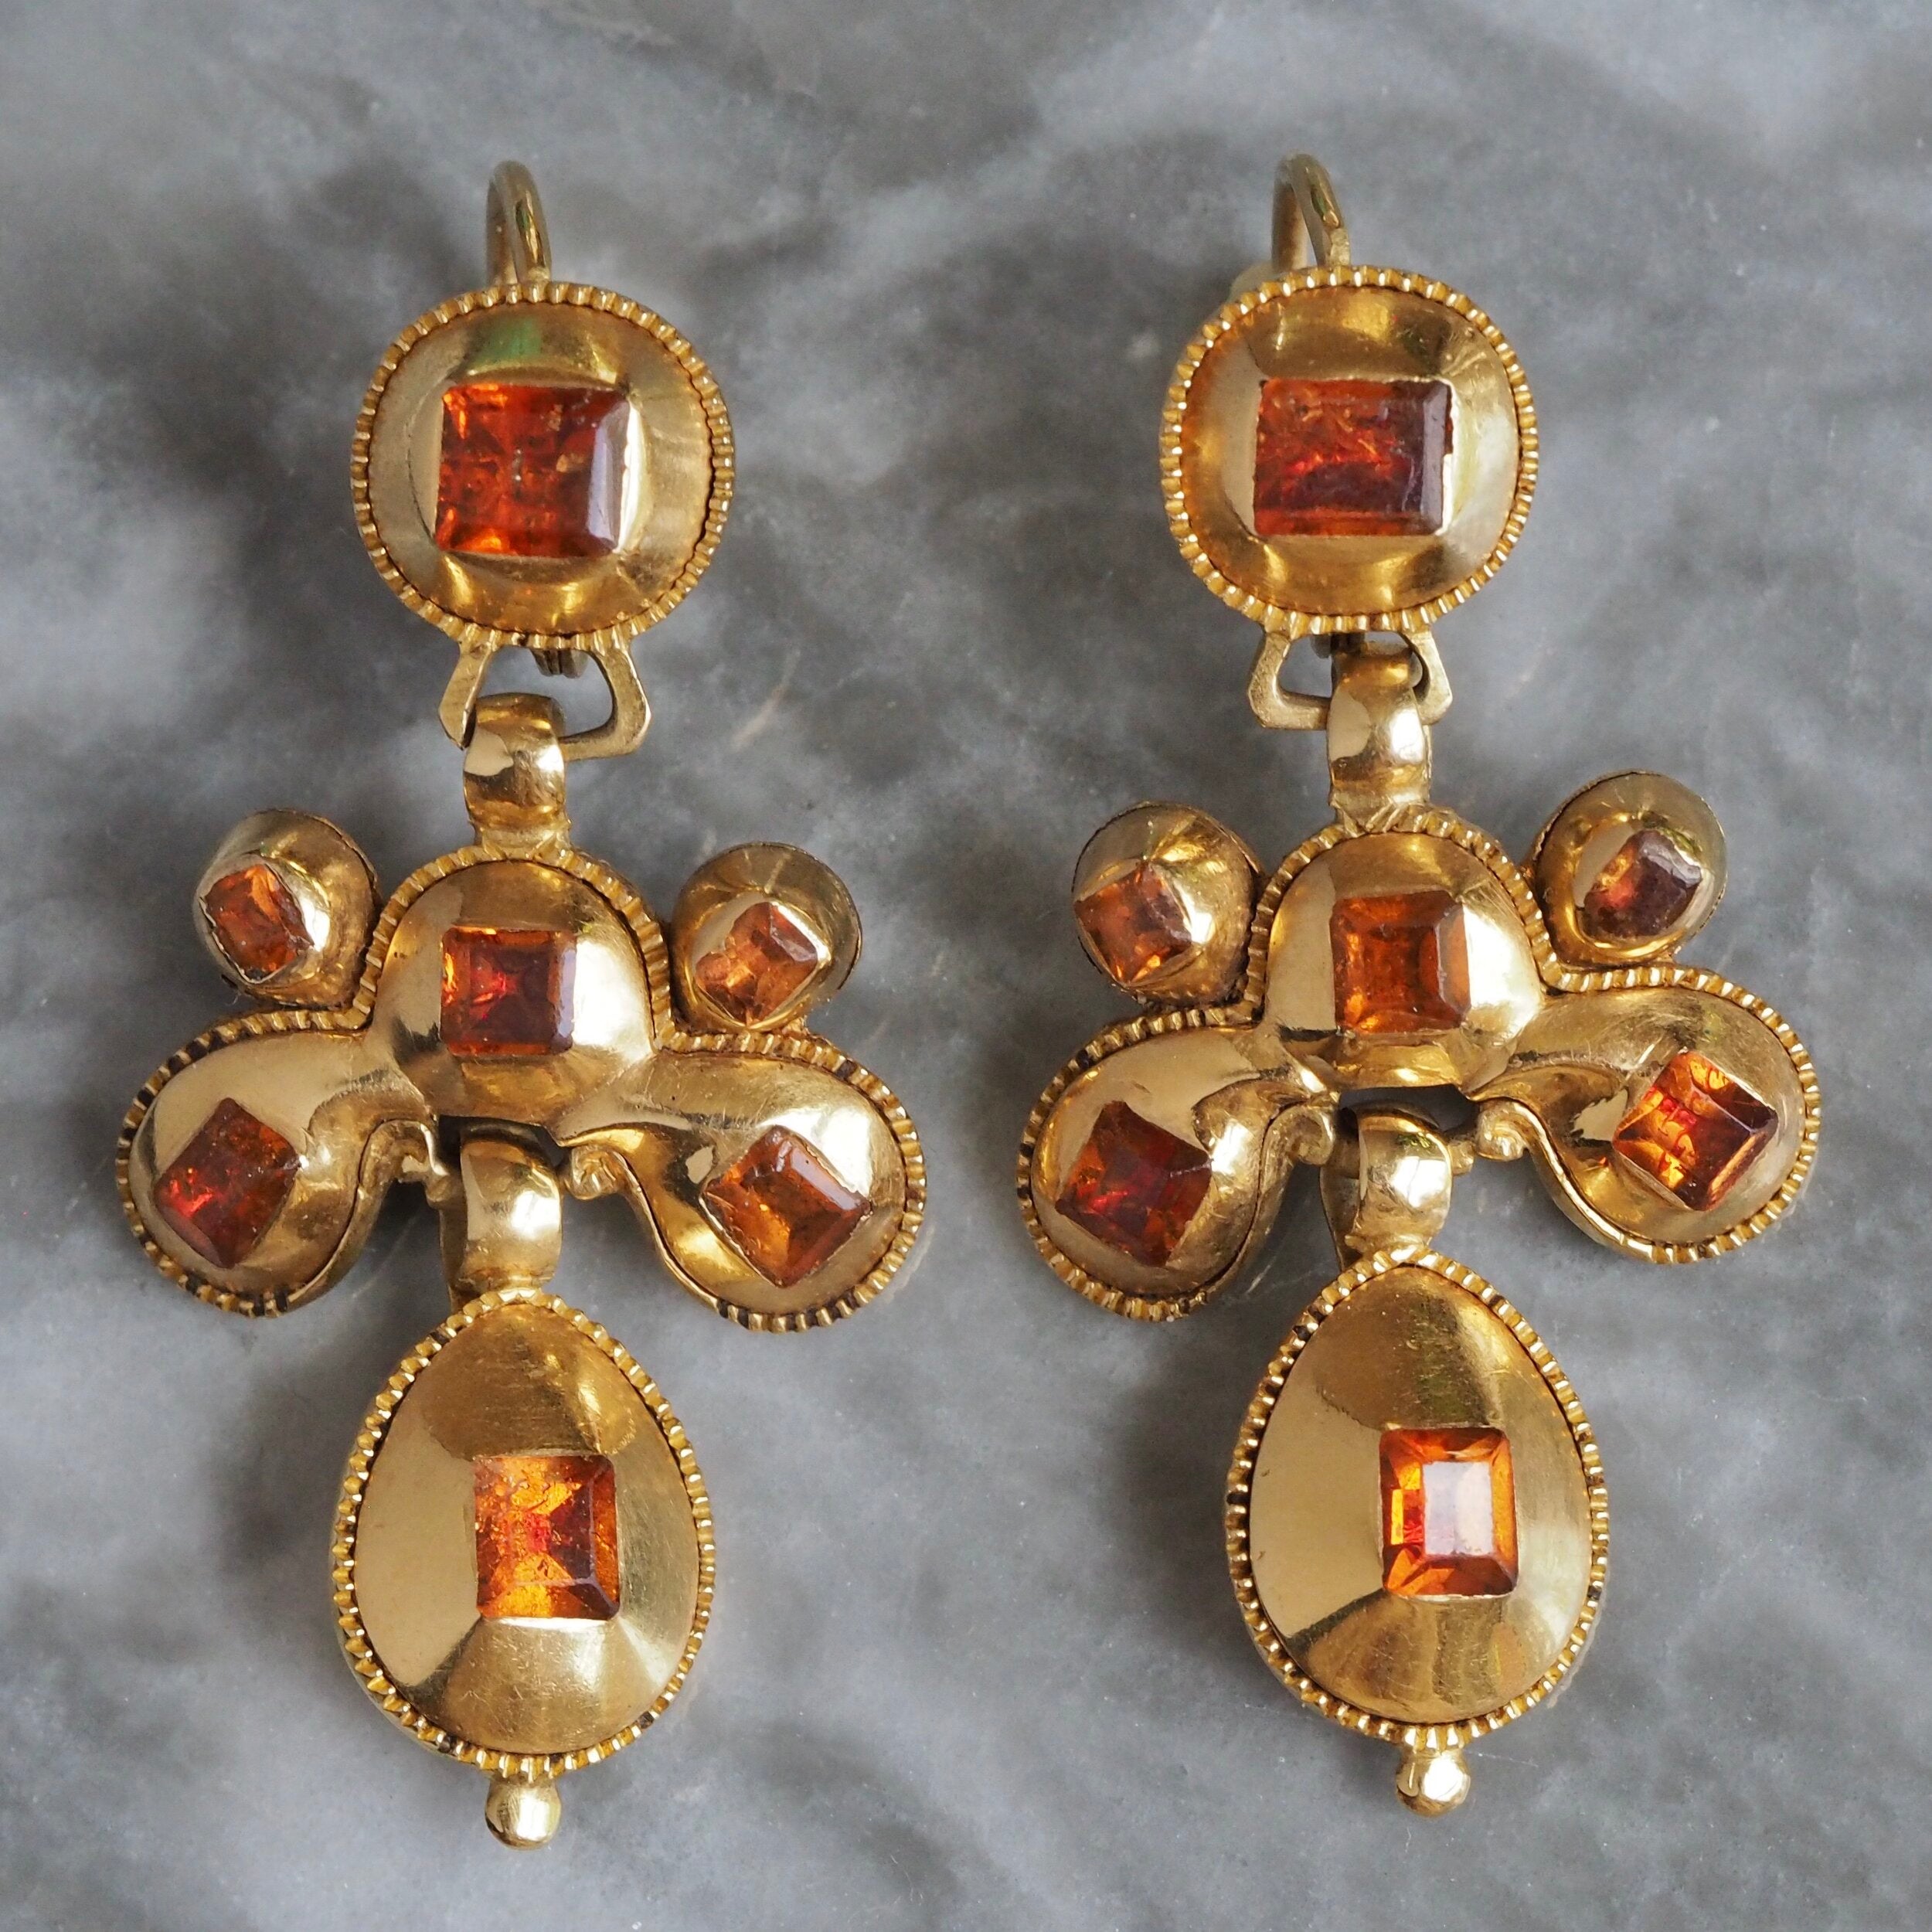 18th Century Catalan Iberian Pendeloque Earrings in 18k Gold with Hessonite Garnets